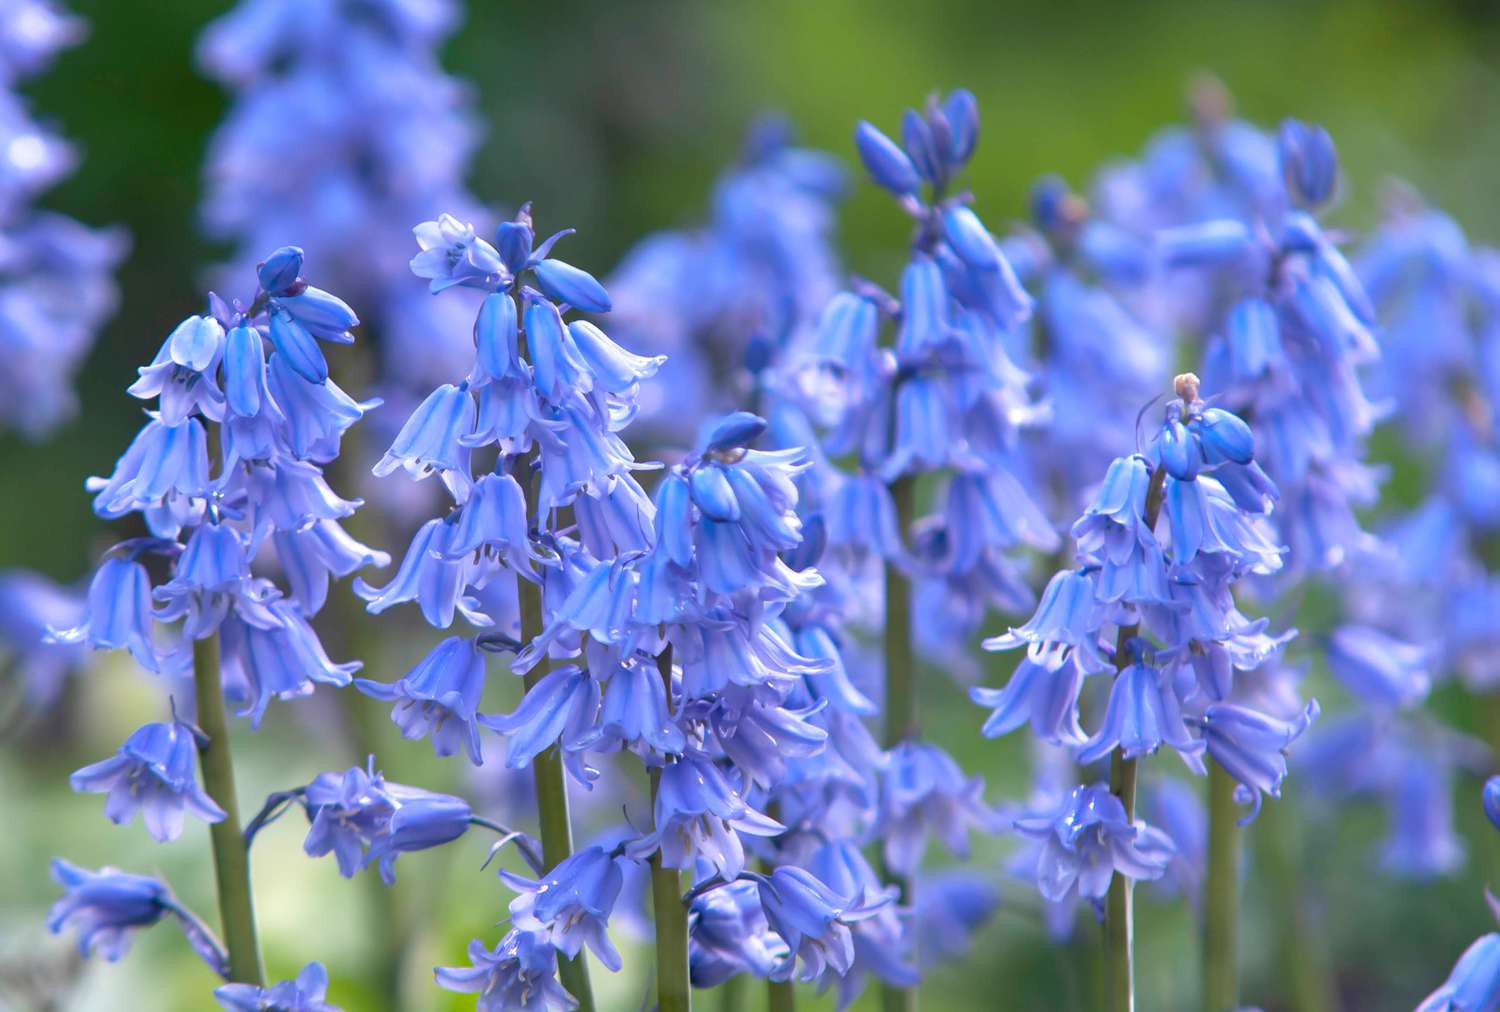 Spanish bluebell plant with blue flowers closeup